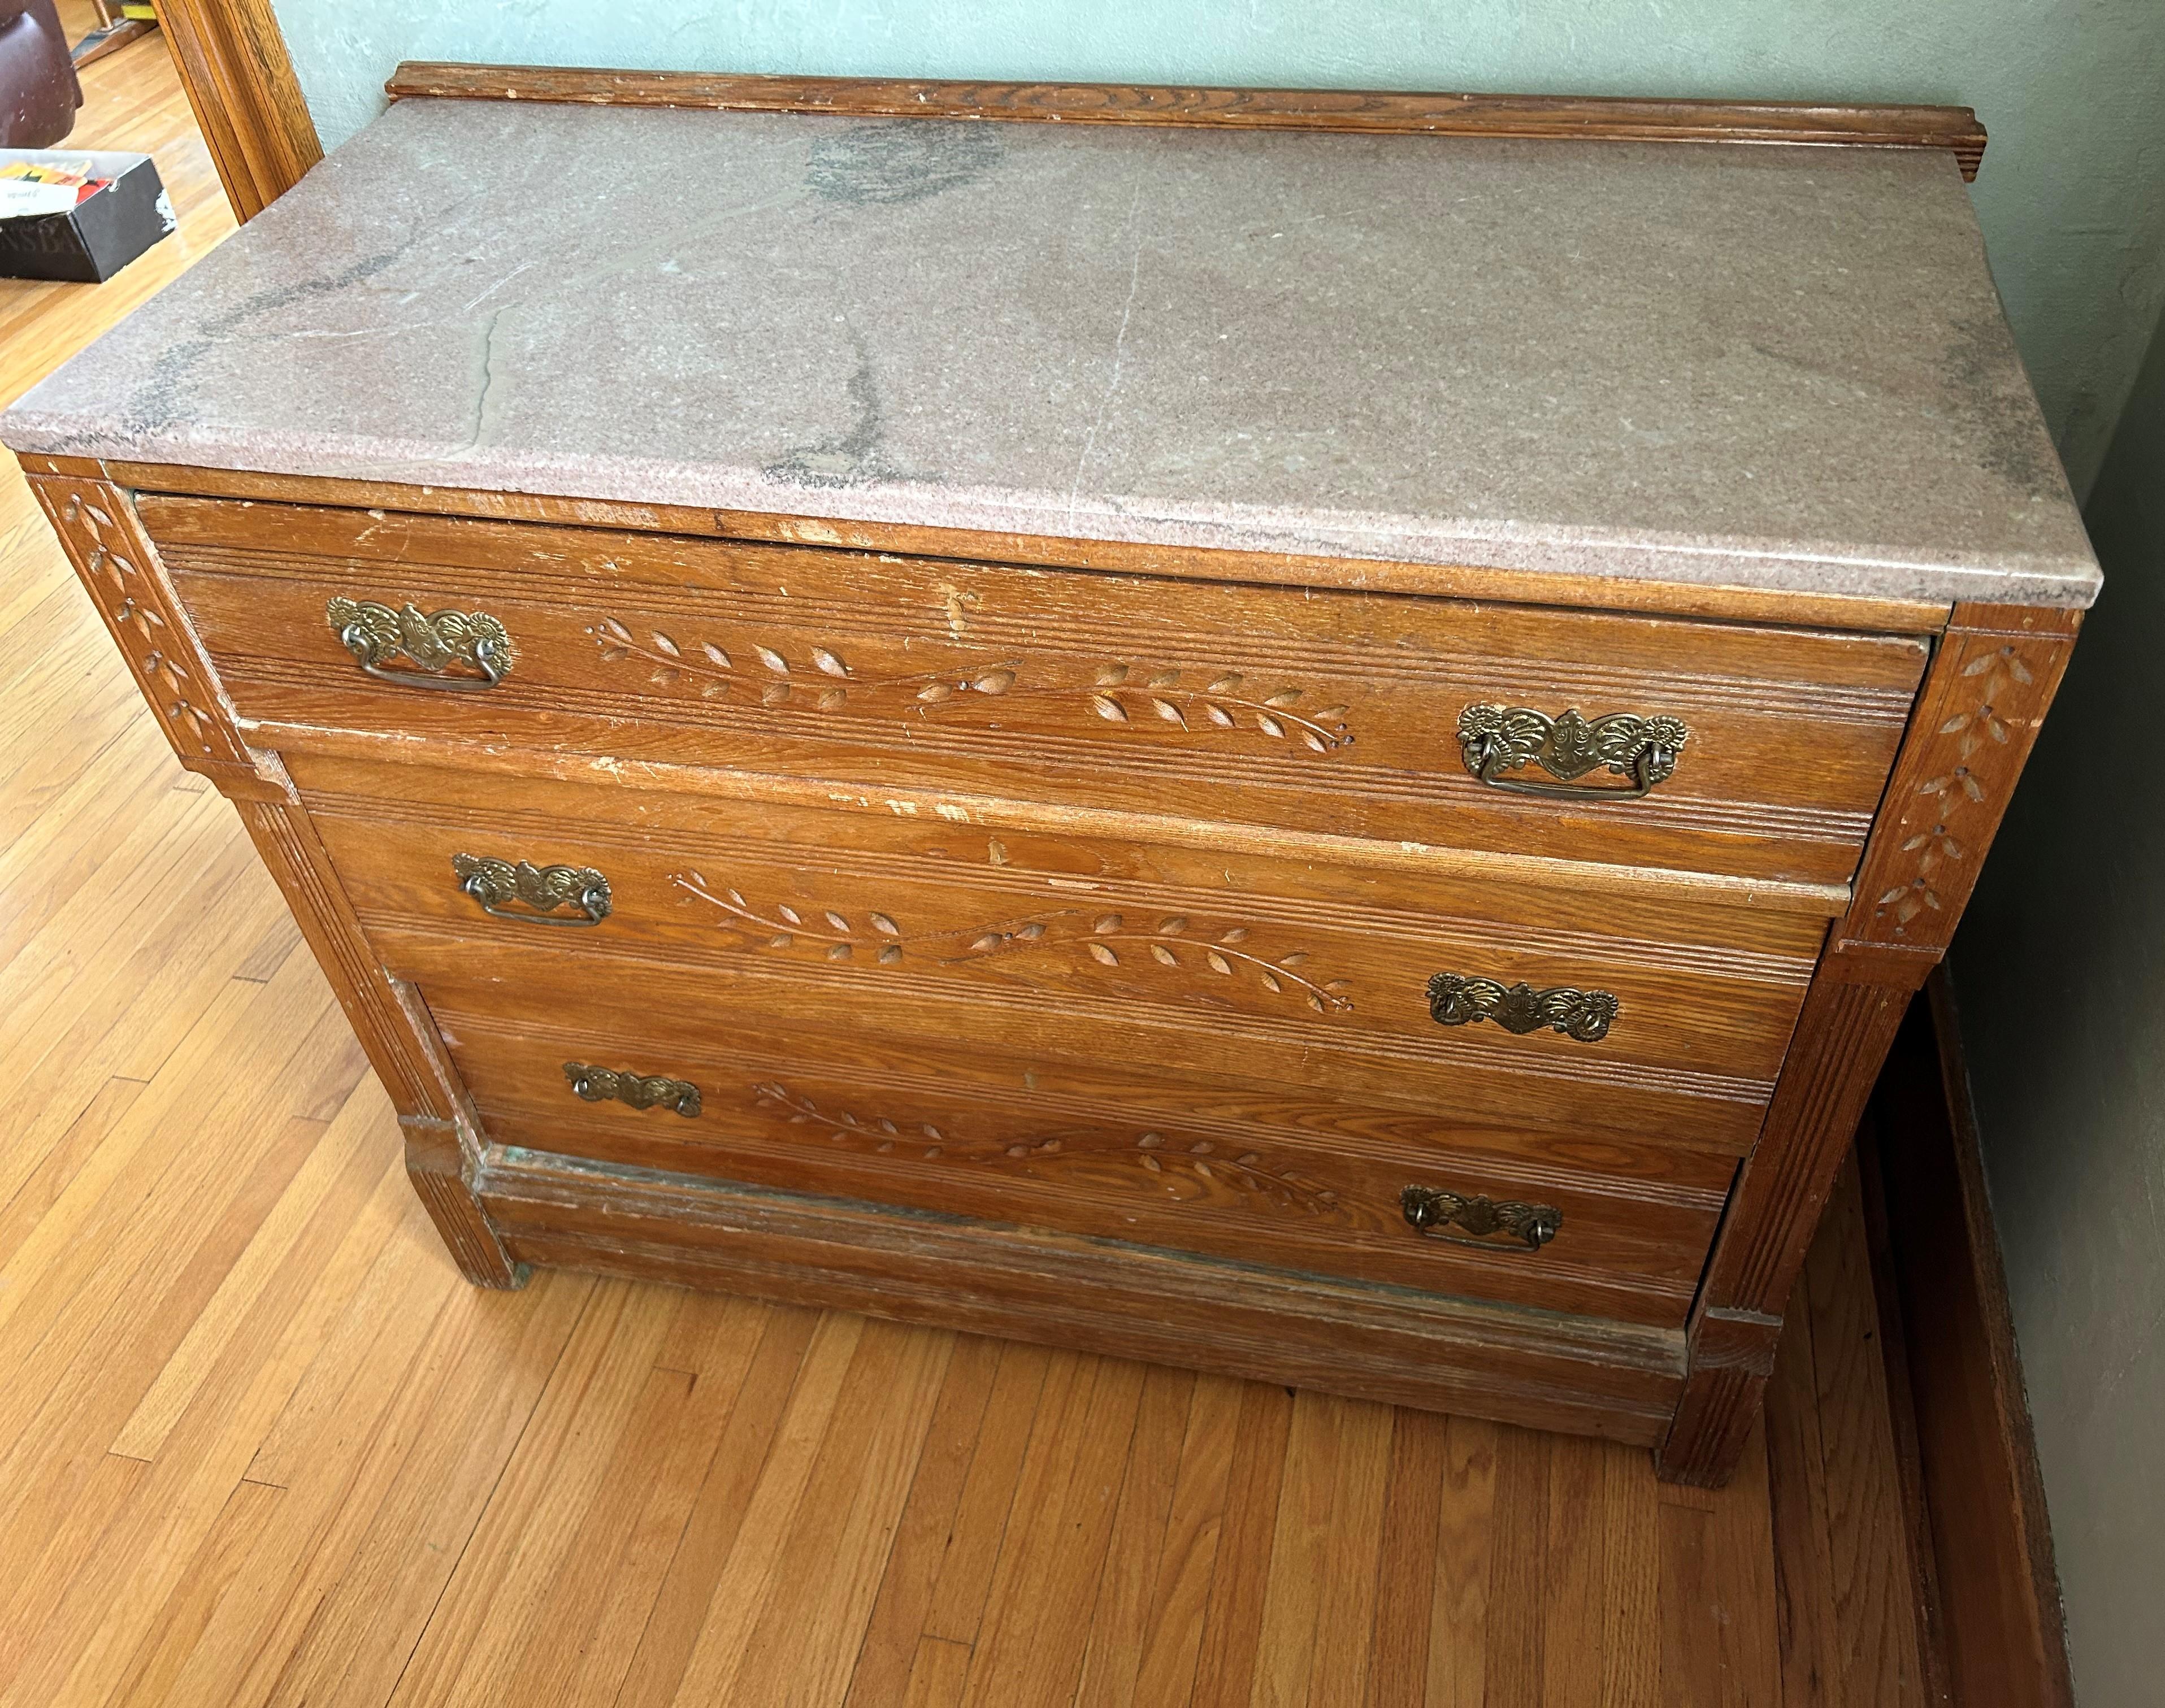 ANTIQUE THREE DRAWER CHEST OF DRAWERS - MARBLE TOP